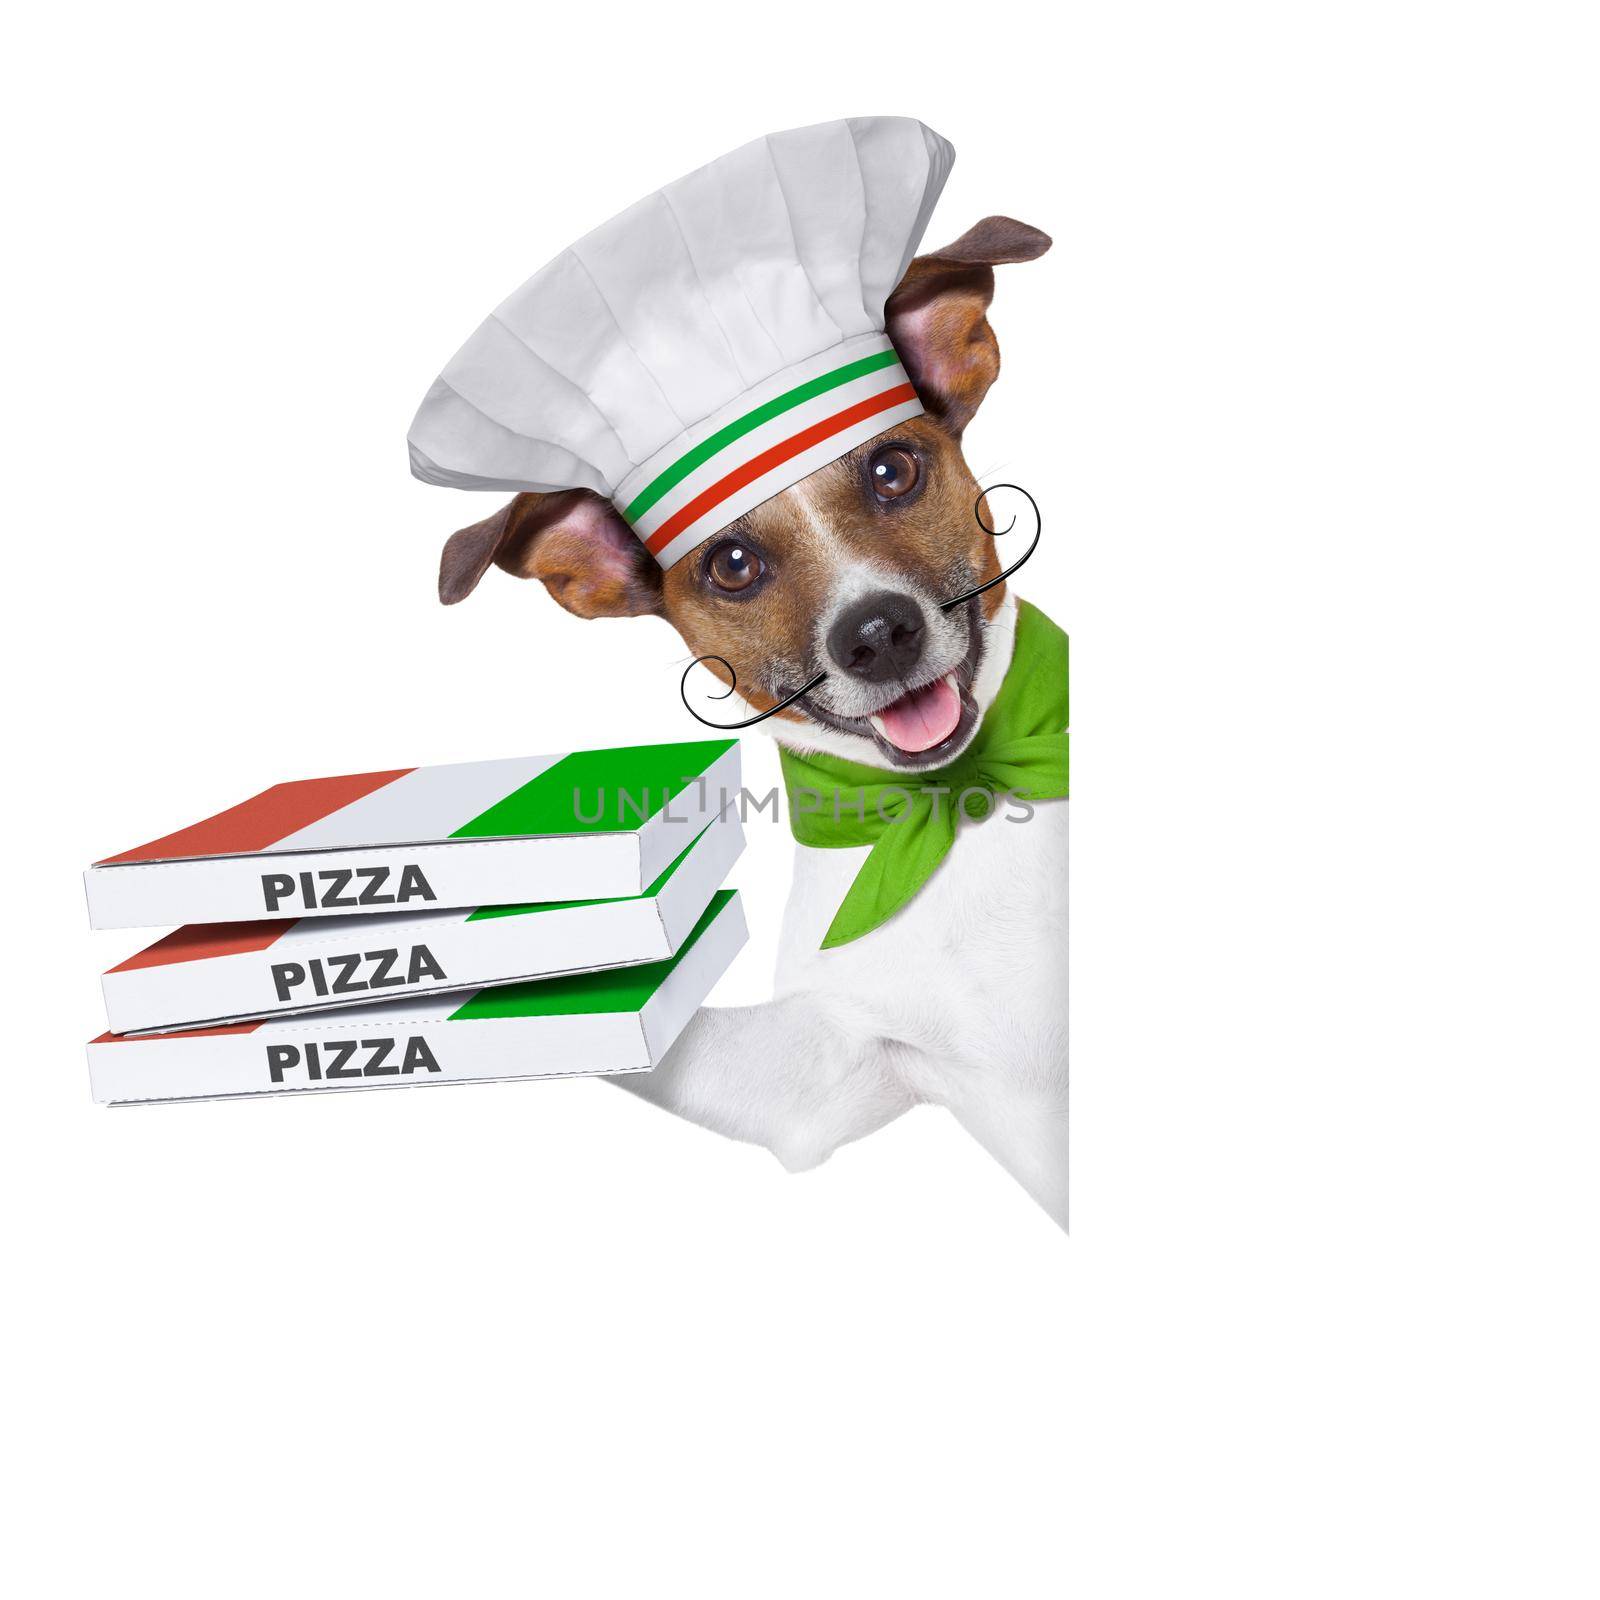 pizza delivery dog with a stack of pizza boxes behind a blank placard